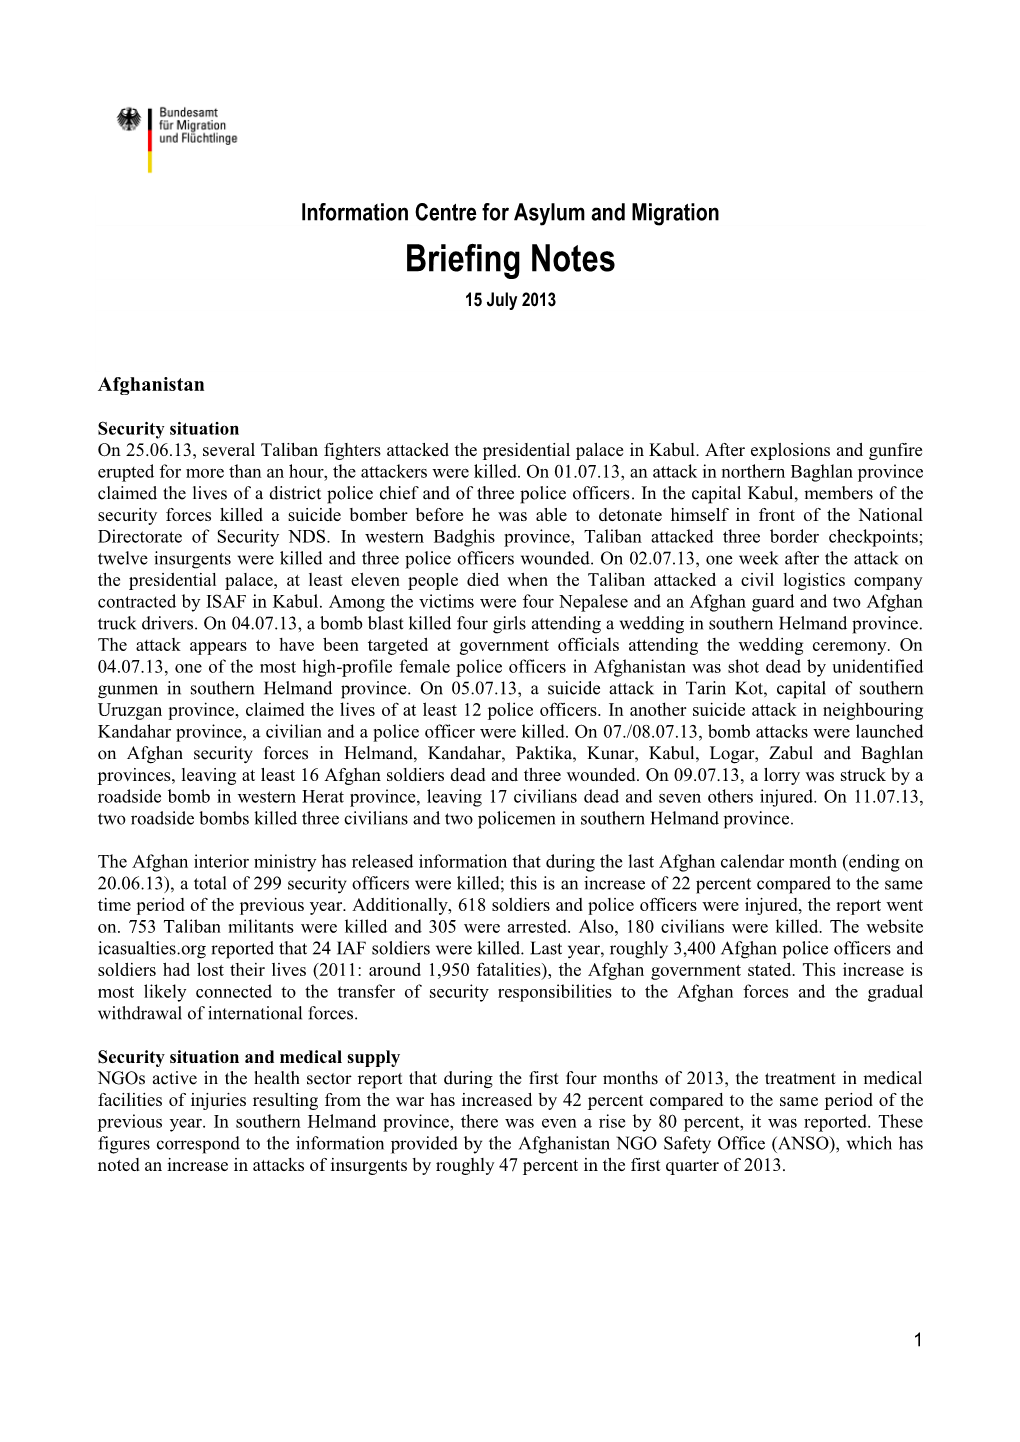 Briefing Notes 15 July 2013